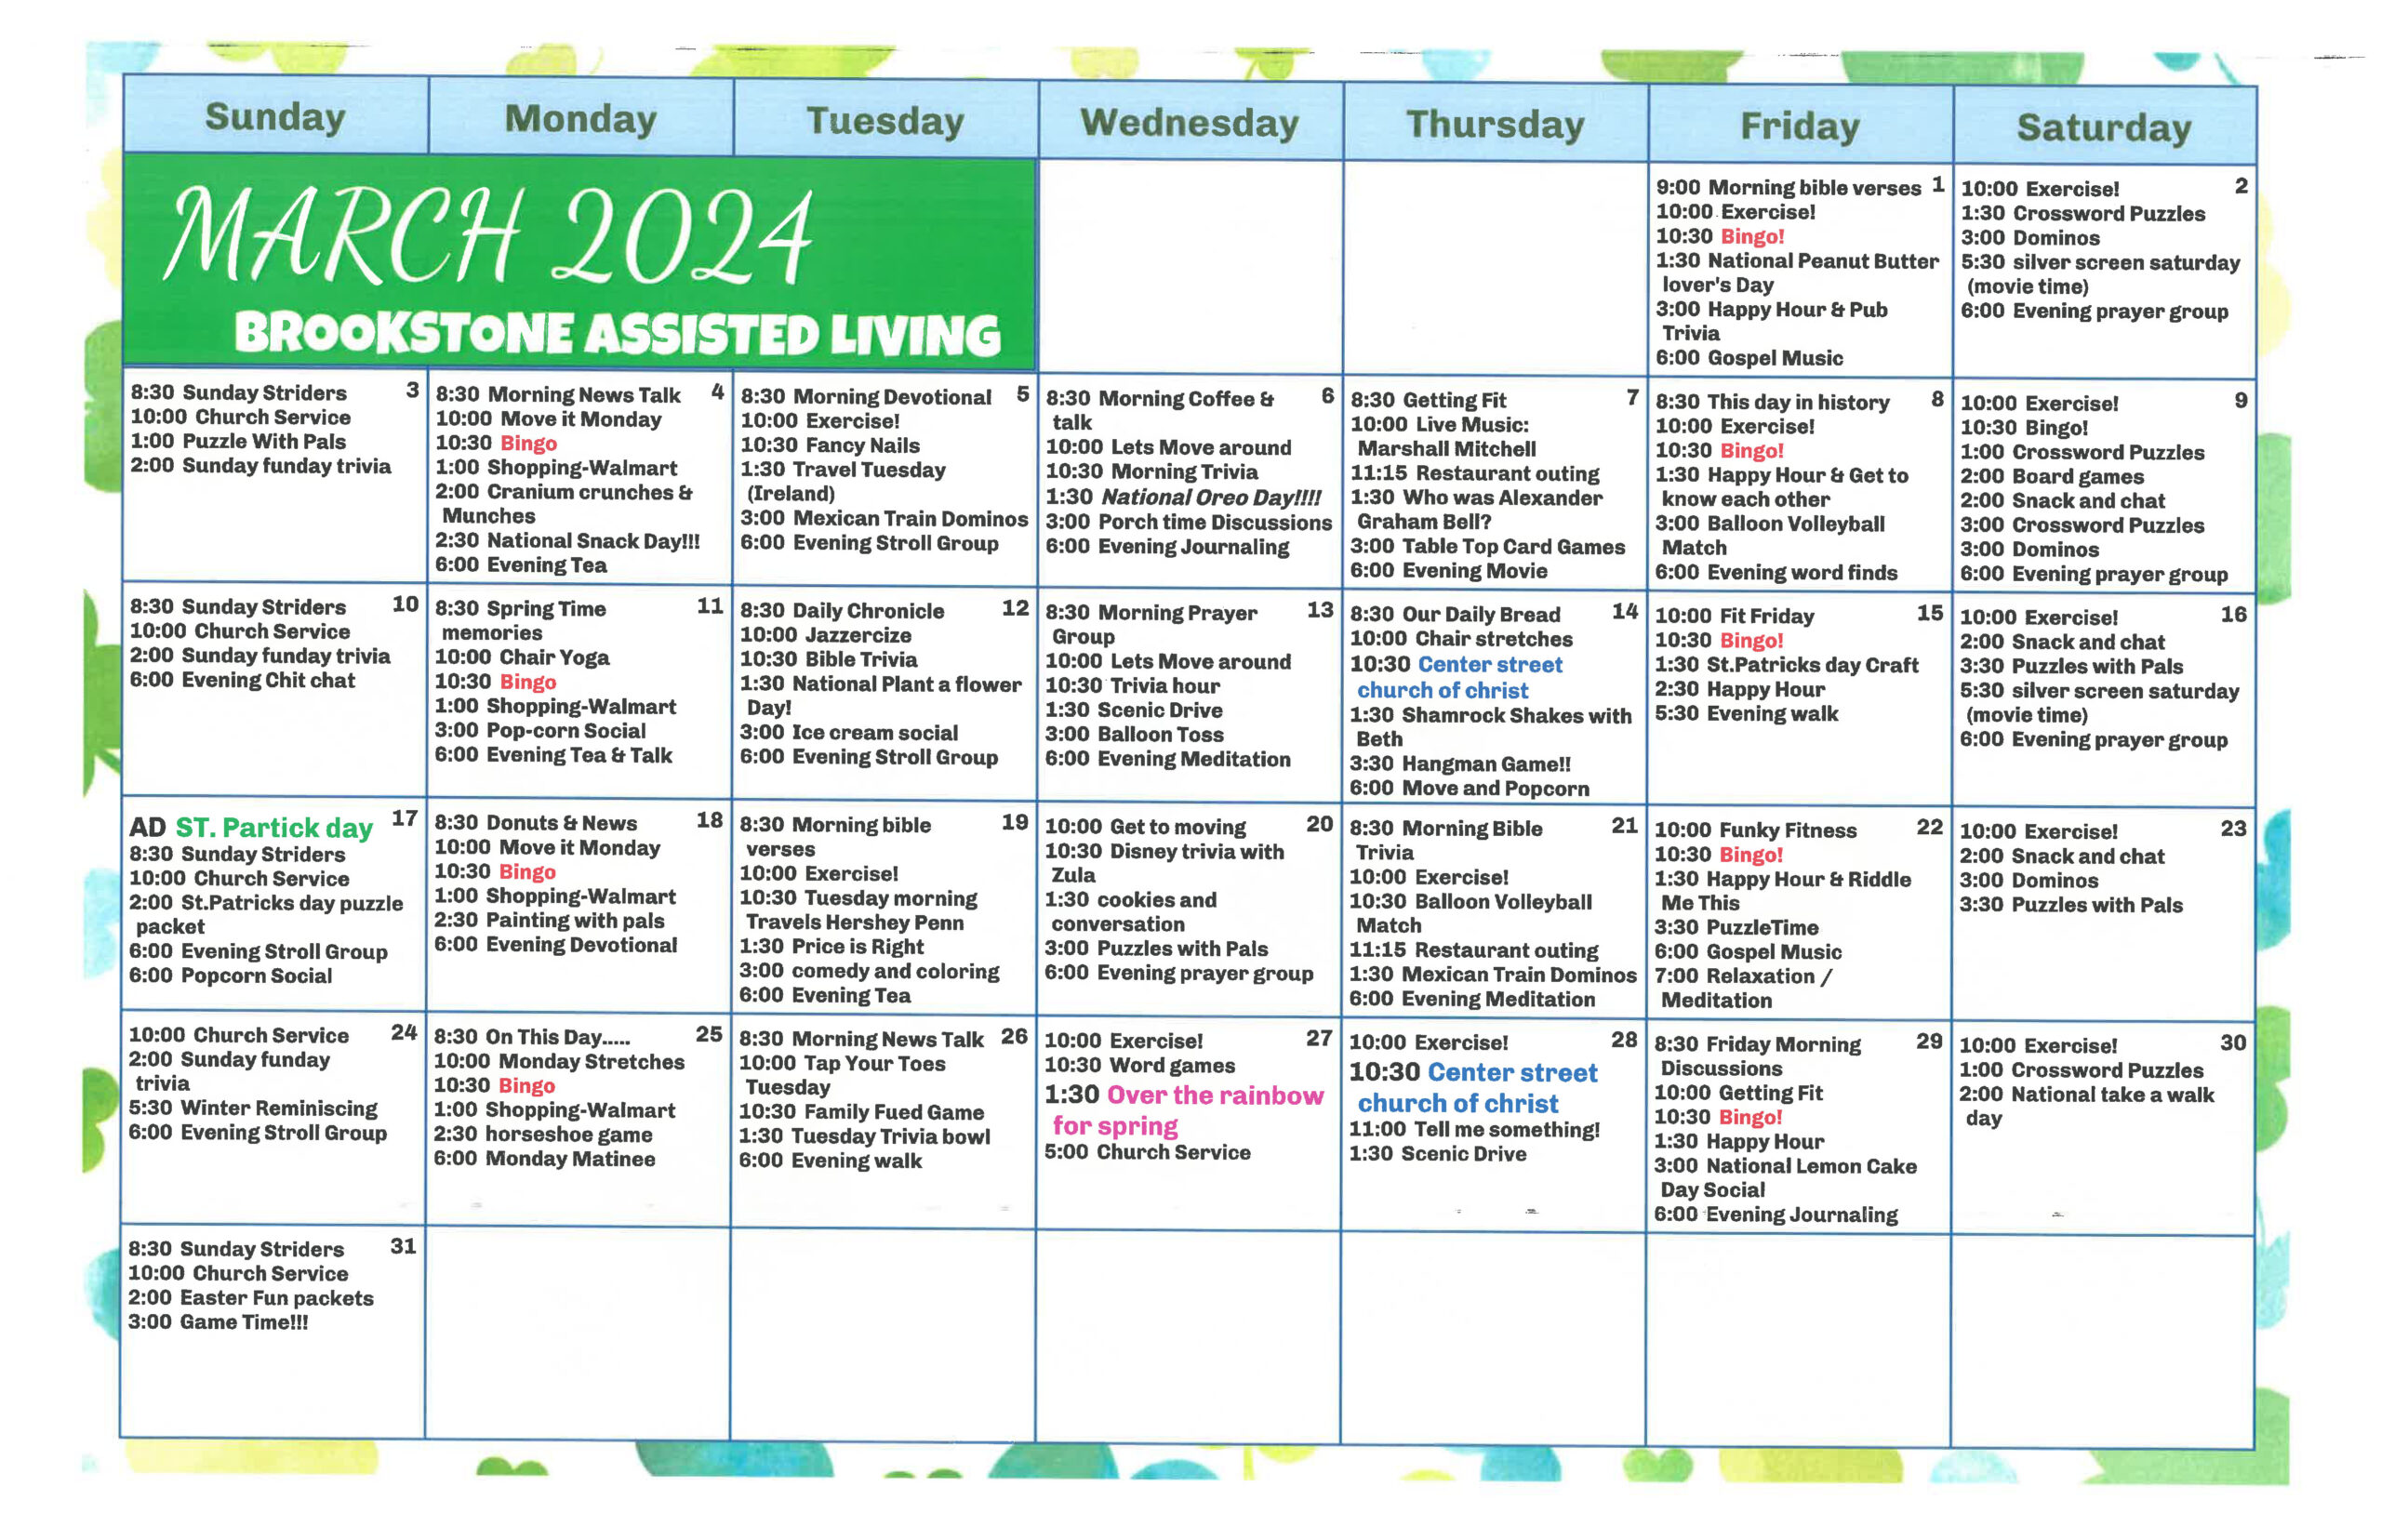 Brookstone Assisted Living - Assisted Living Events Calendar